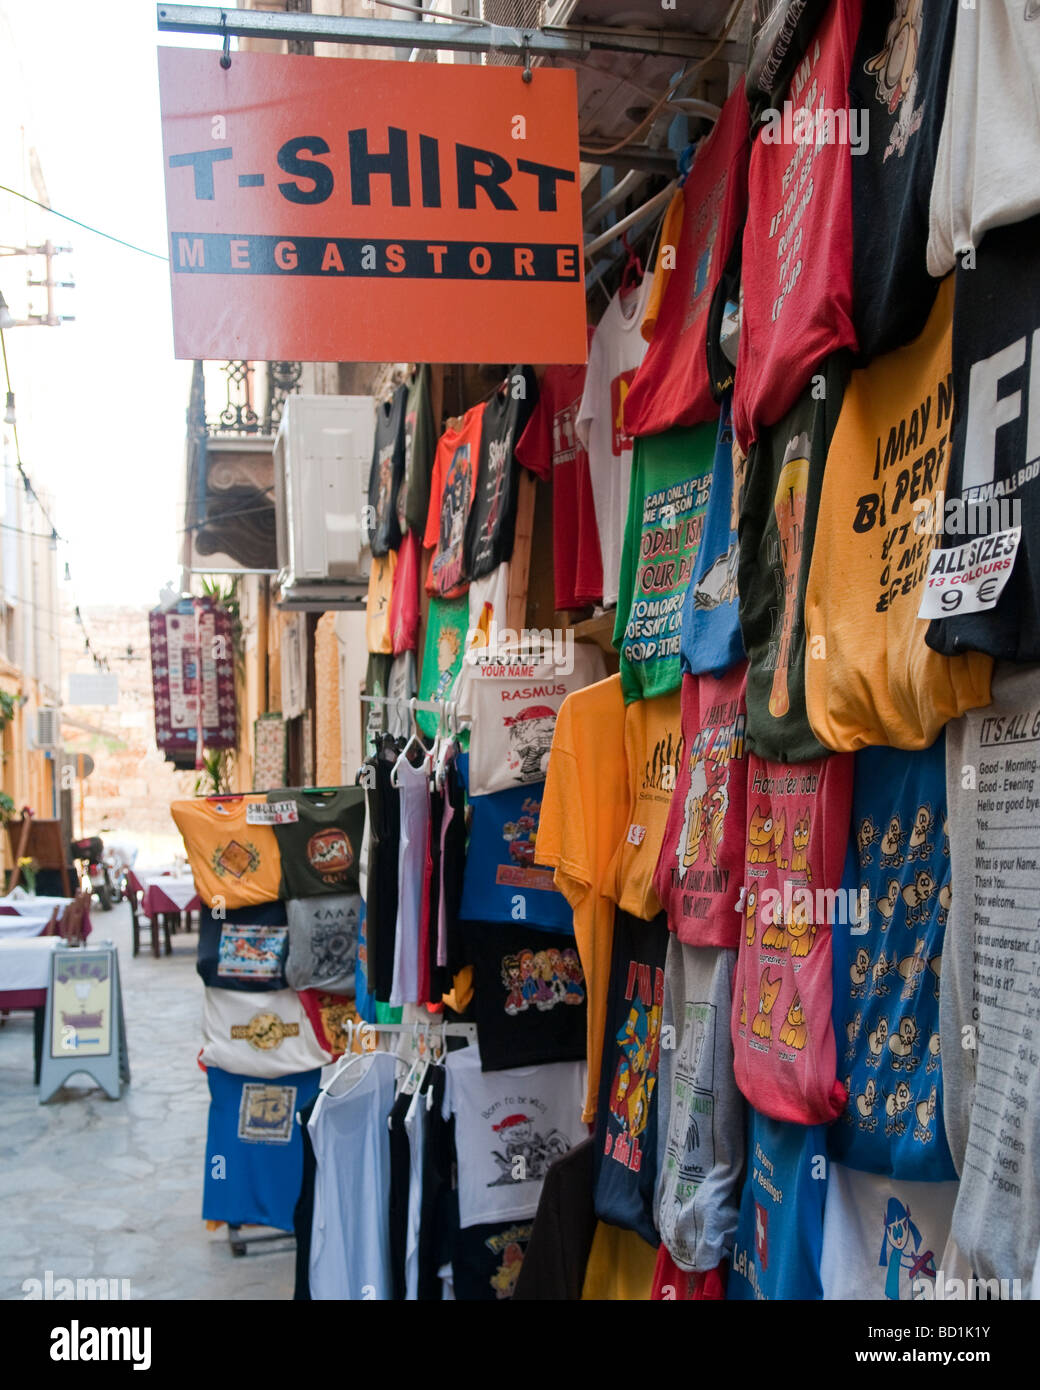 Shop selling t shirts in Chania, Crete, Greece Stock Photo - Alamy